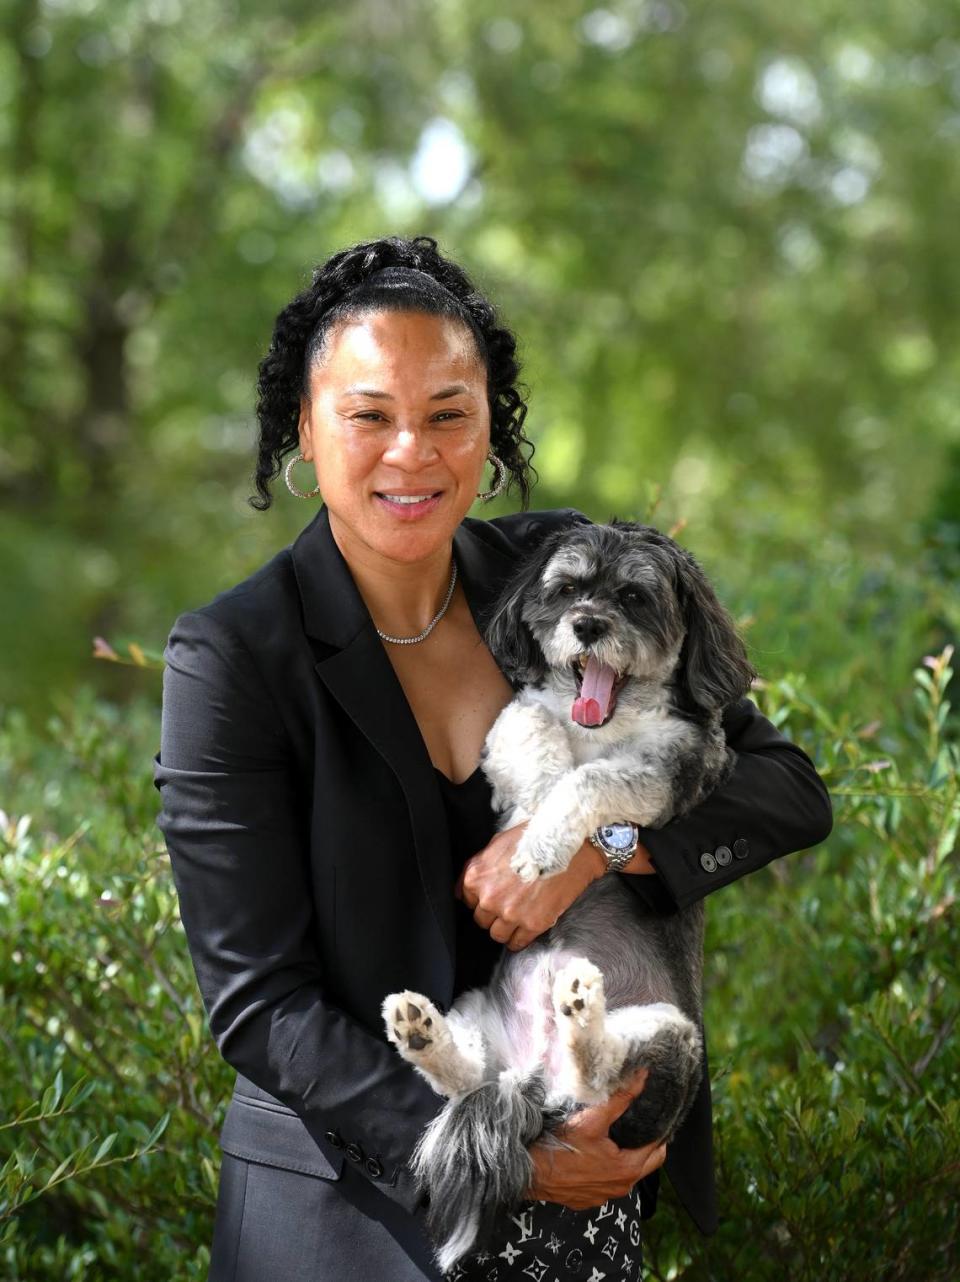 University of South Carolina head women’s basketball coach Dawn Staley and Champ on Monday, August 20, 2022 in Columbia, SC. Staley won numerous awards during her playing career including three Olympic gold medals and is a member of the Basketball Hall of Fame. As a coach, Staley has lead two team’s to the NCAA Division I championship. JEFF SINER/jsiner@charlotteobserver.com